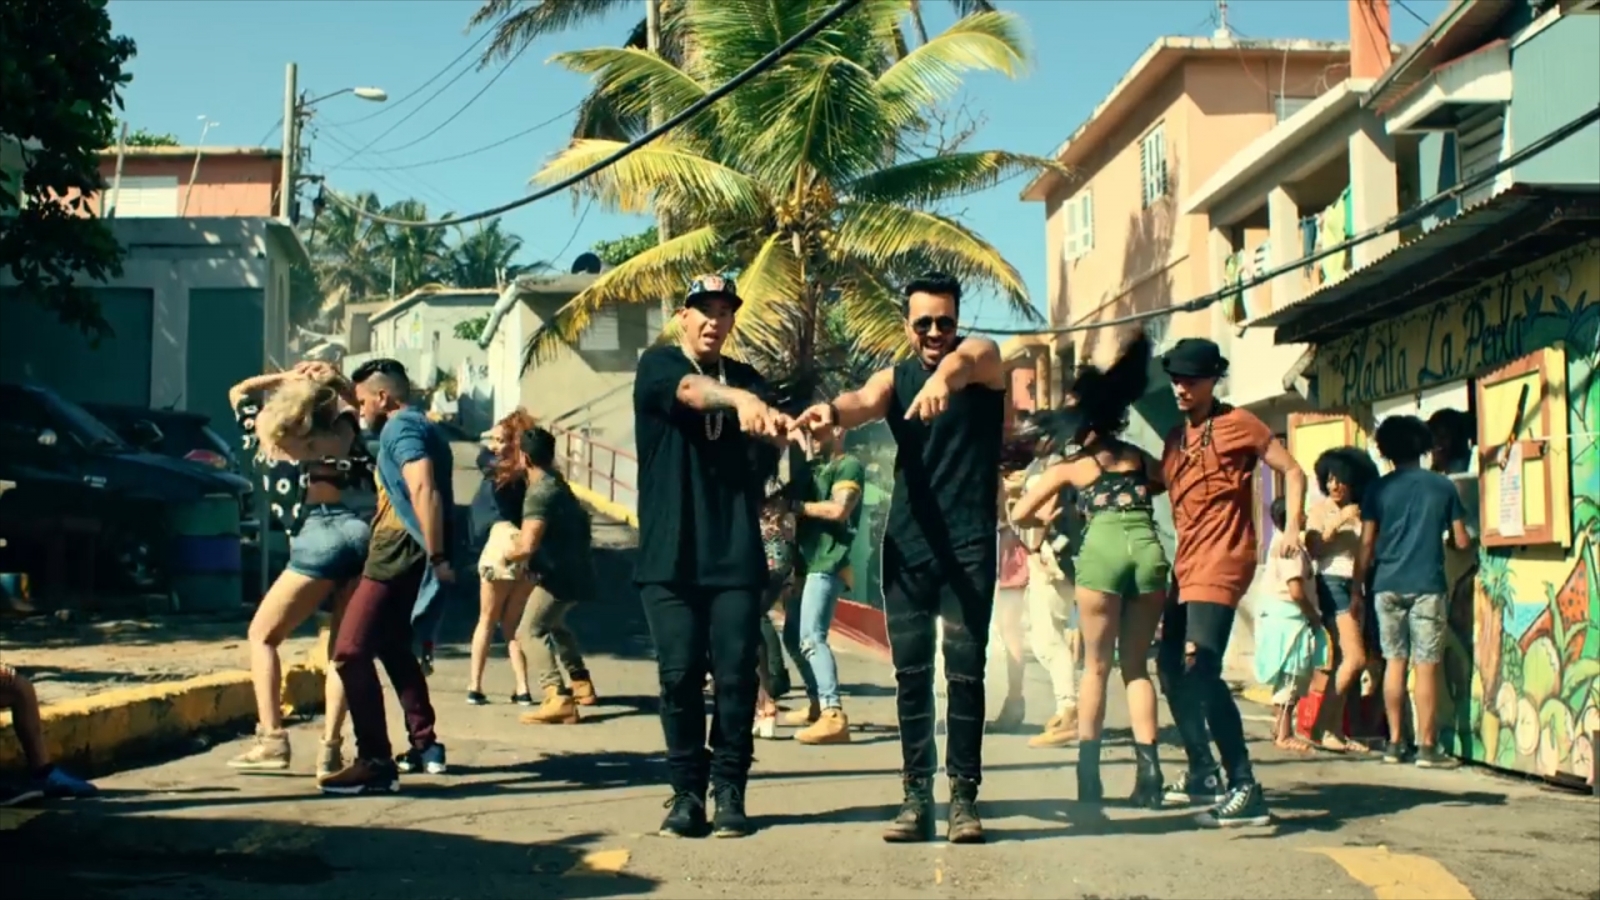 Despacito is not an acceptable party anthem, says feminist organisation